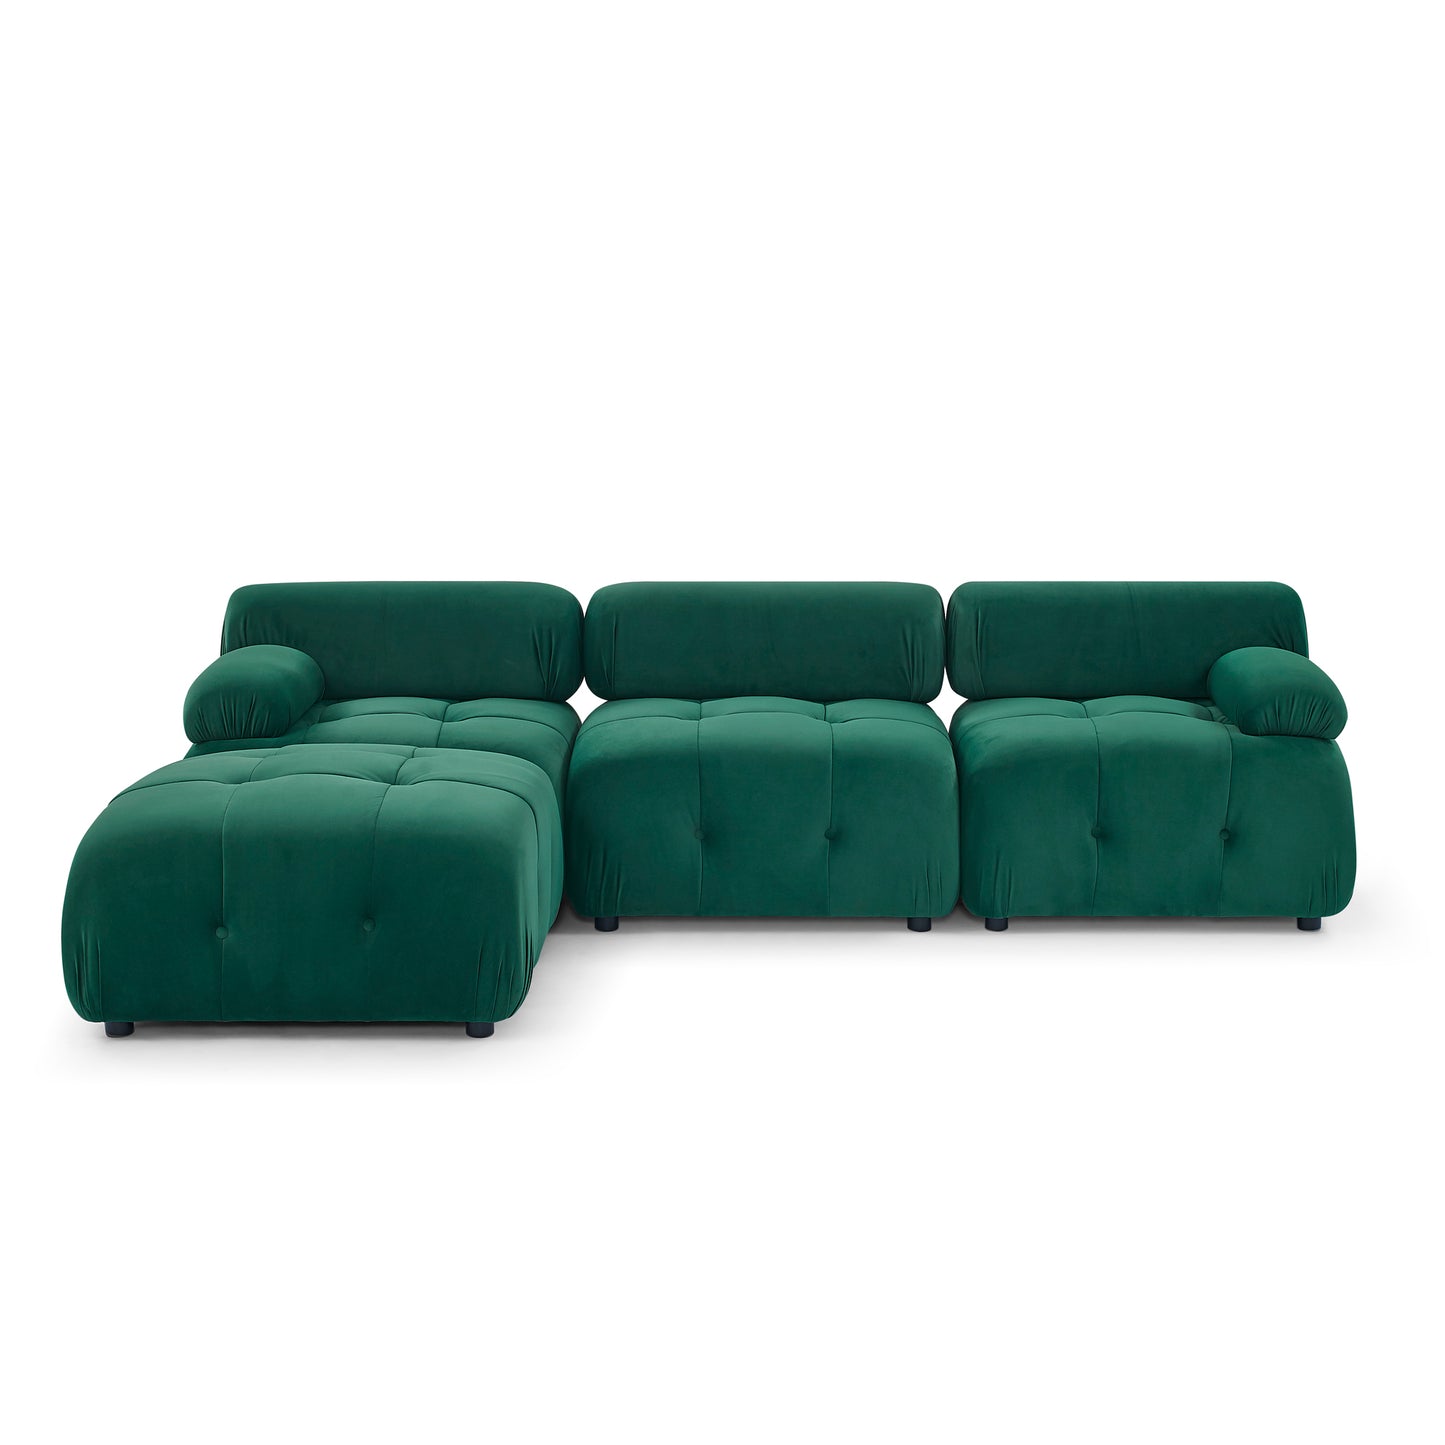 Modular Sectional Sofa, Button Tufted Designed and DIY Combination,L Shaped Couch with Reversible Ottoman, Green Velvet